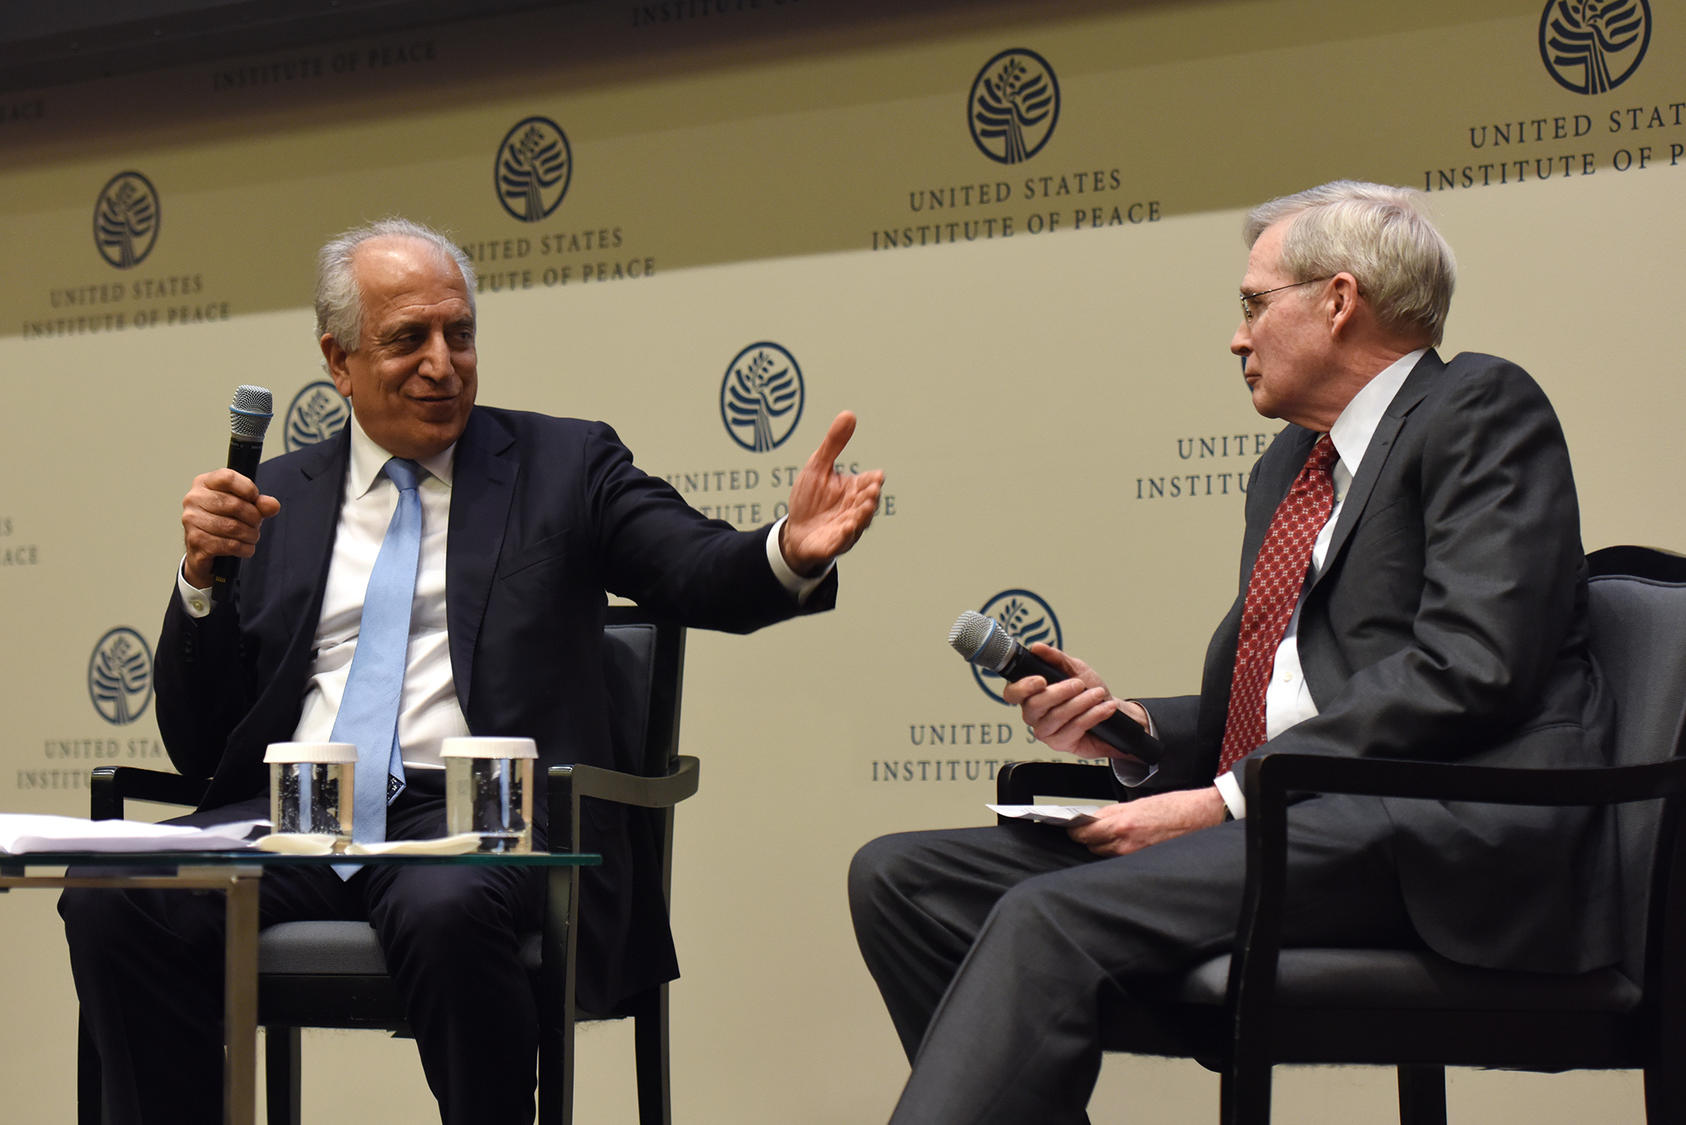 Special Representative for Afghanistan Reconciliation Zalmay Khalilzad speaks with Stephen J. Hadley, chair of USIP's Board of Directors.